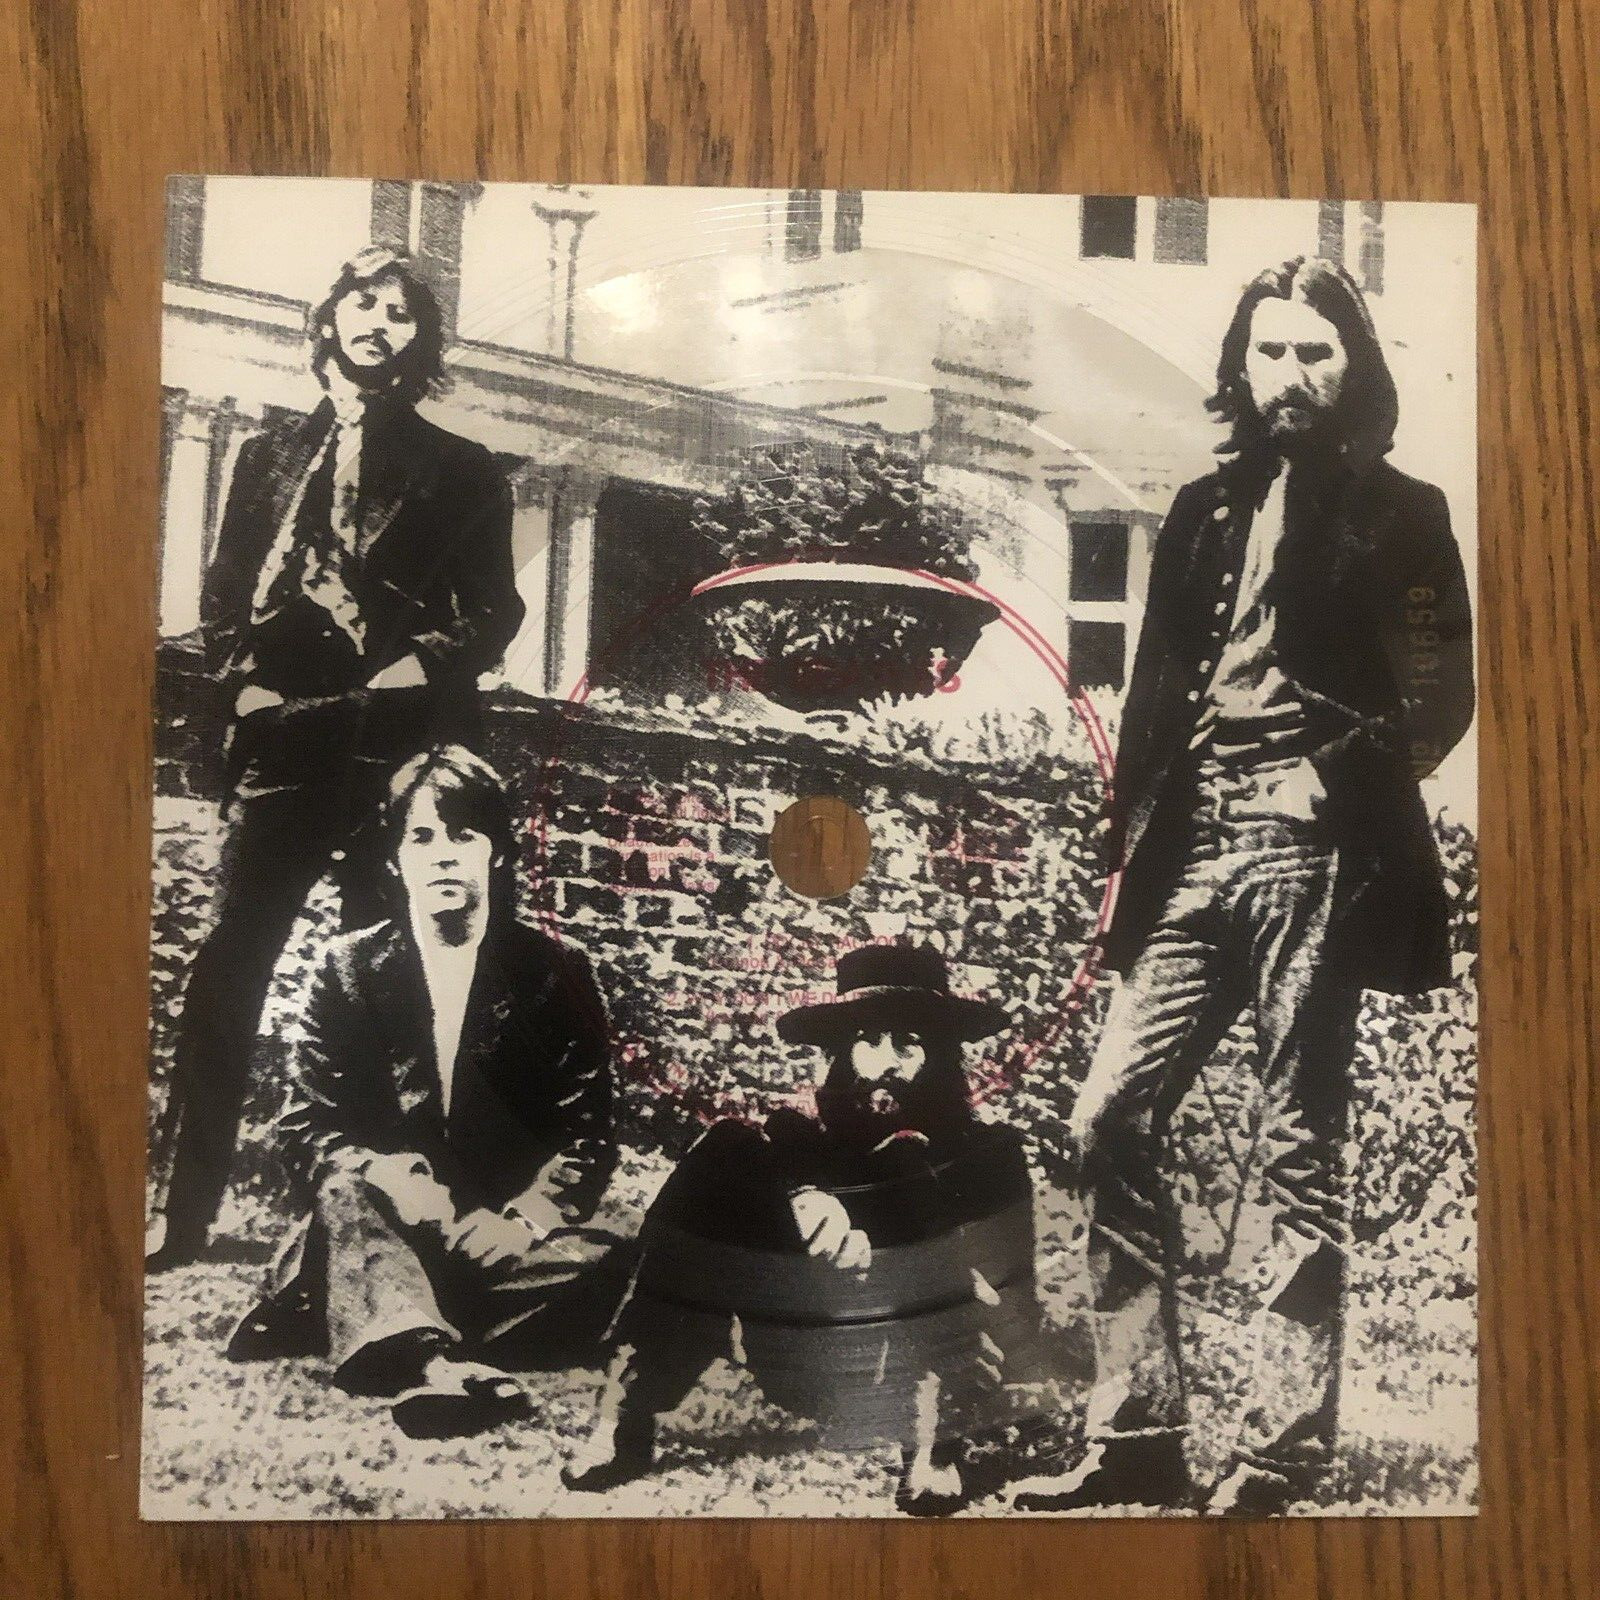 THE BEATLES - MUSICLAND FLEXI DISC, NUMBERED, 2 TRACK, PROMO, 1982, NM,  RARE !